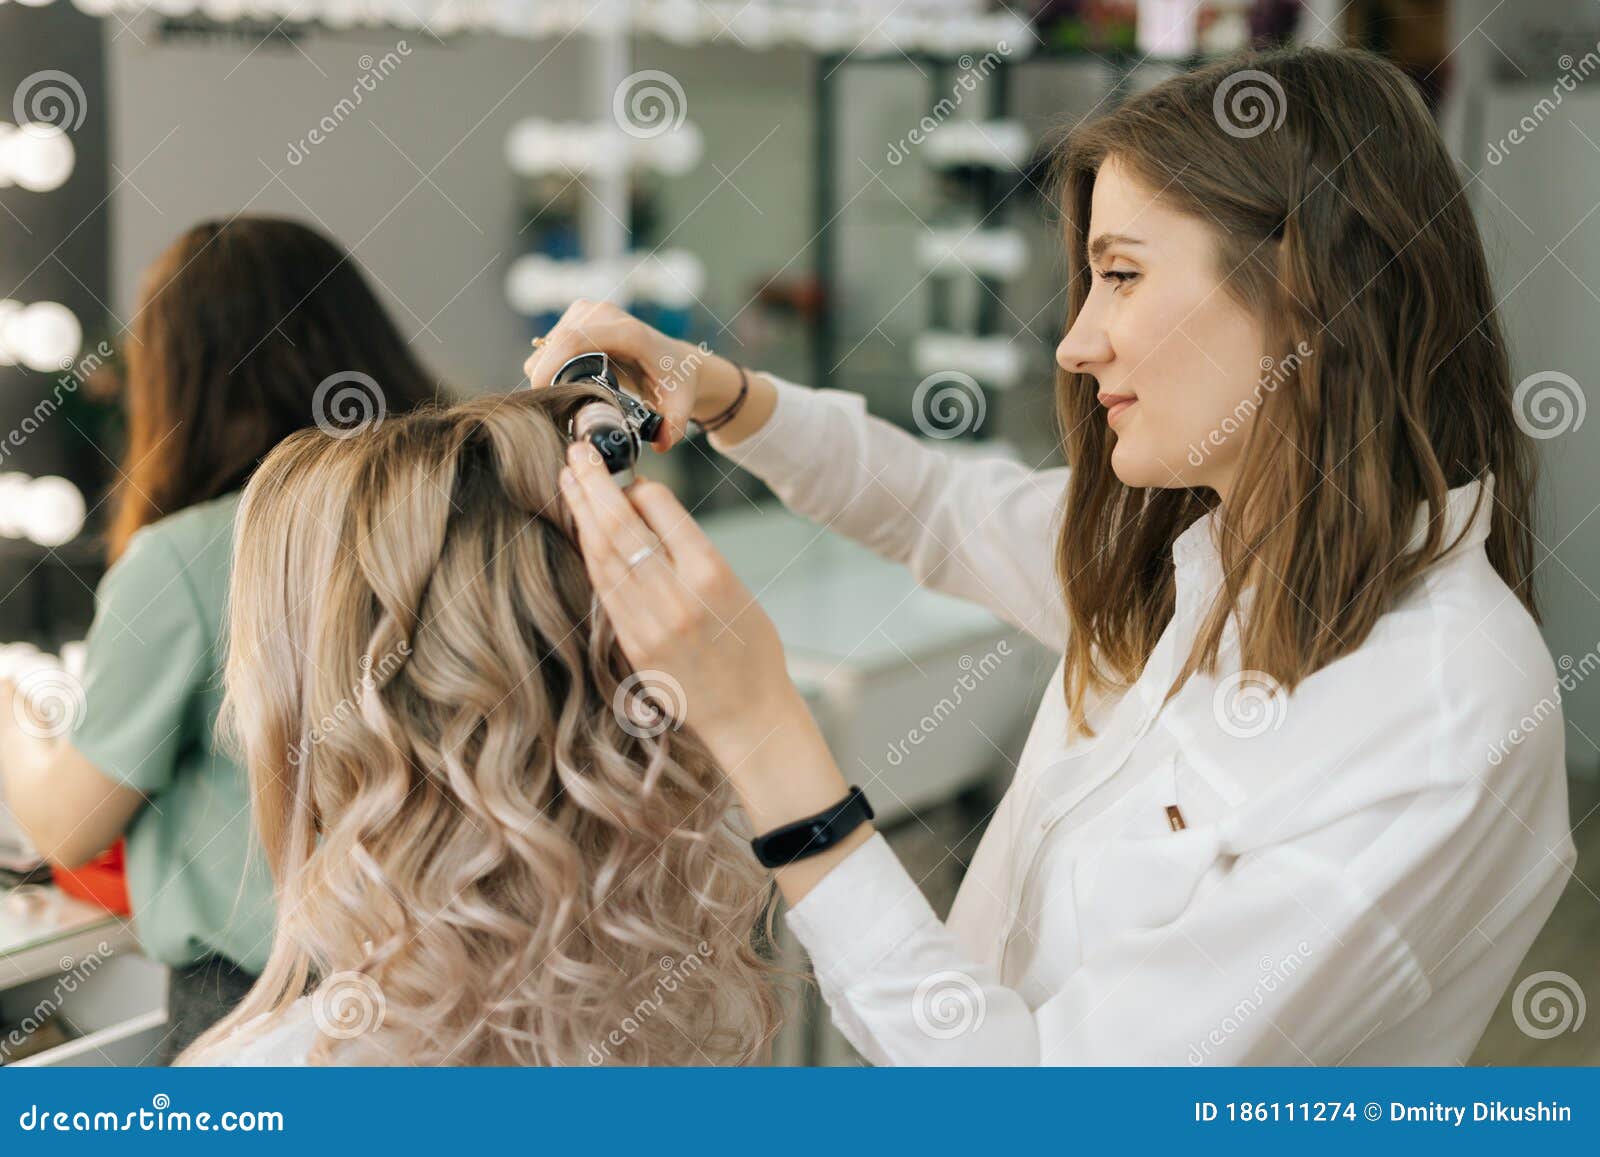 Female Hairdresser Making Hairstyle for Unrecognizable Woman with Blonde  Hair in Salon. Stock Photo - Image of closeup, glamour: 186111274